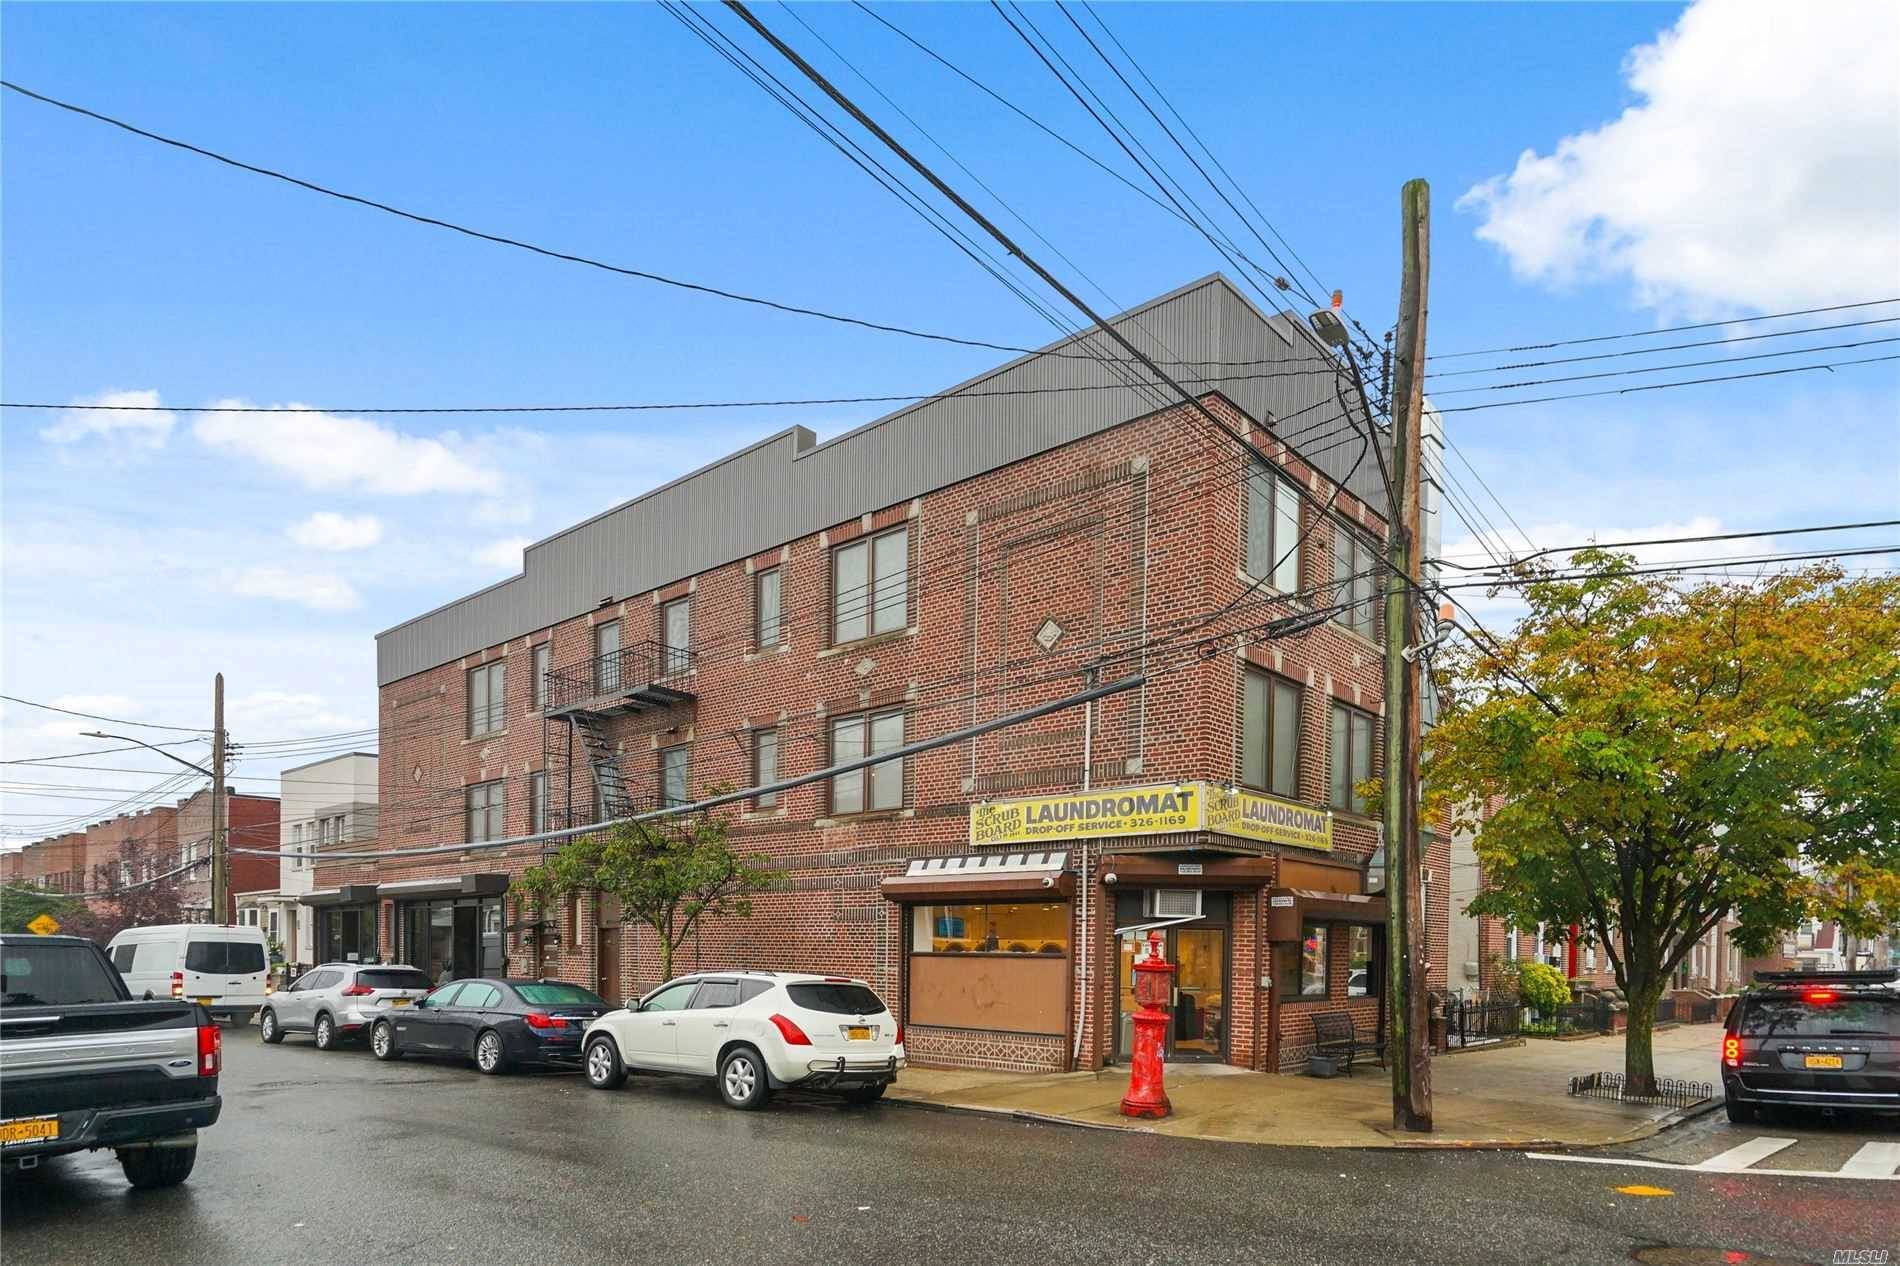 Welcome to 7804 67th Dr Multi Family Mixed Use residential and commercial building with fabulous income generating laundromat business.